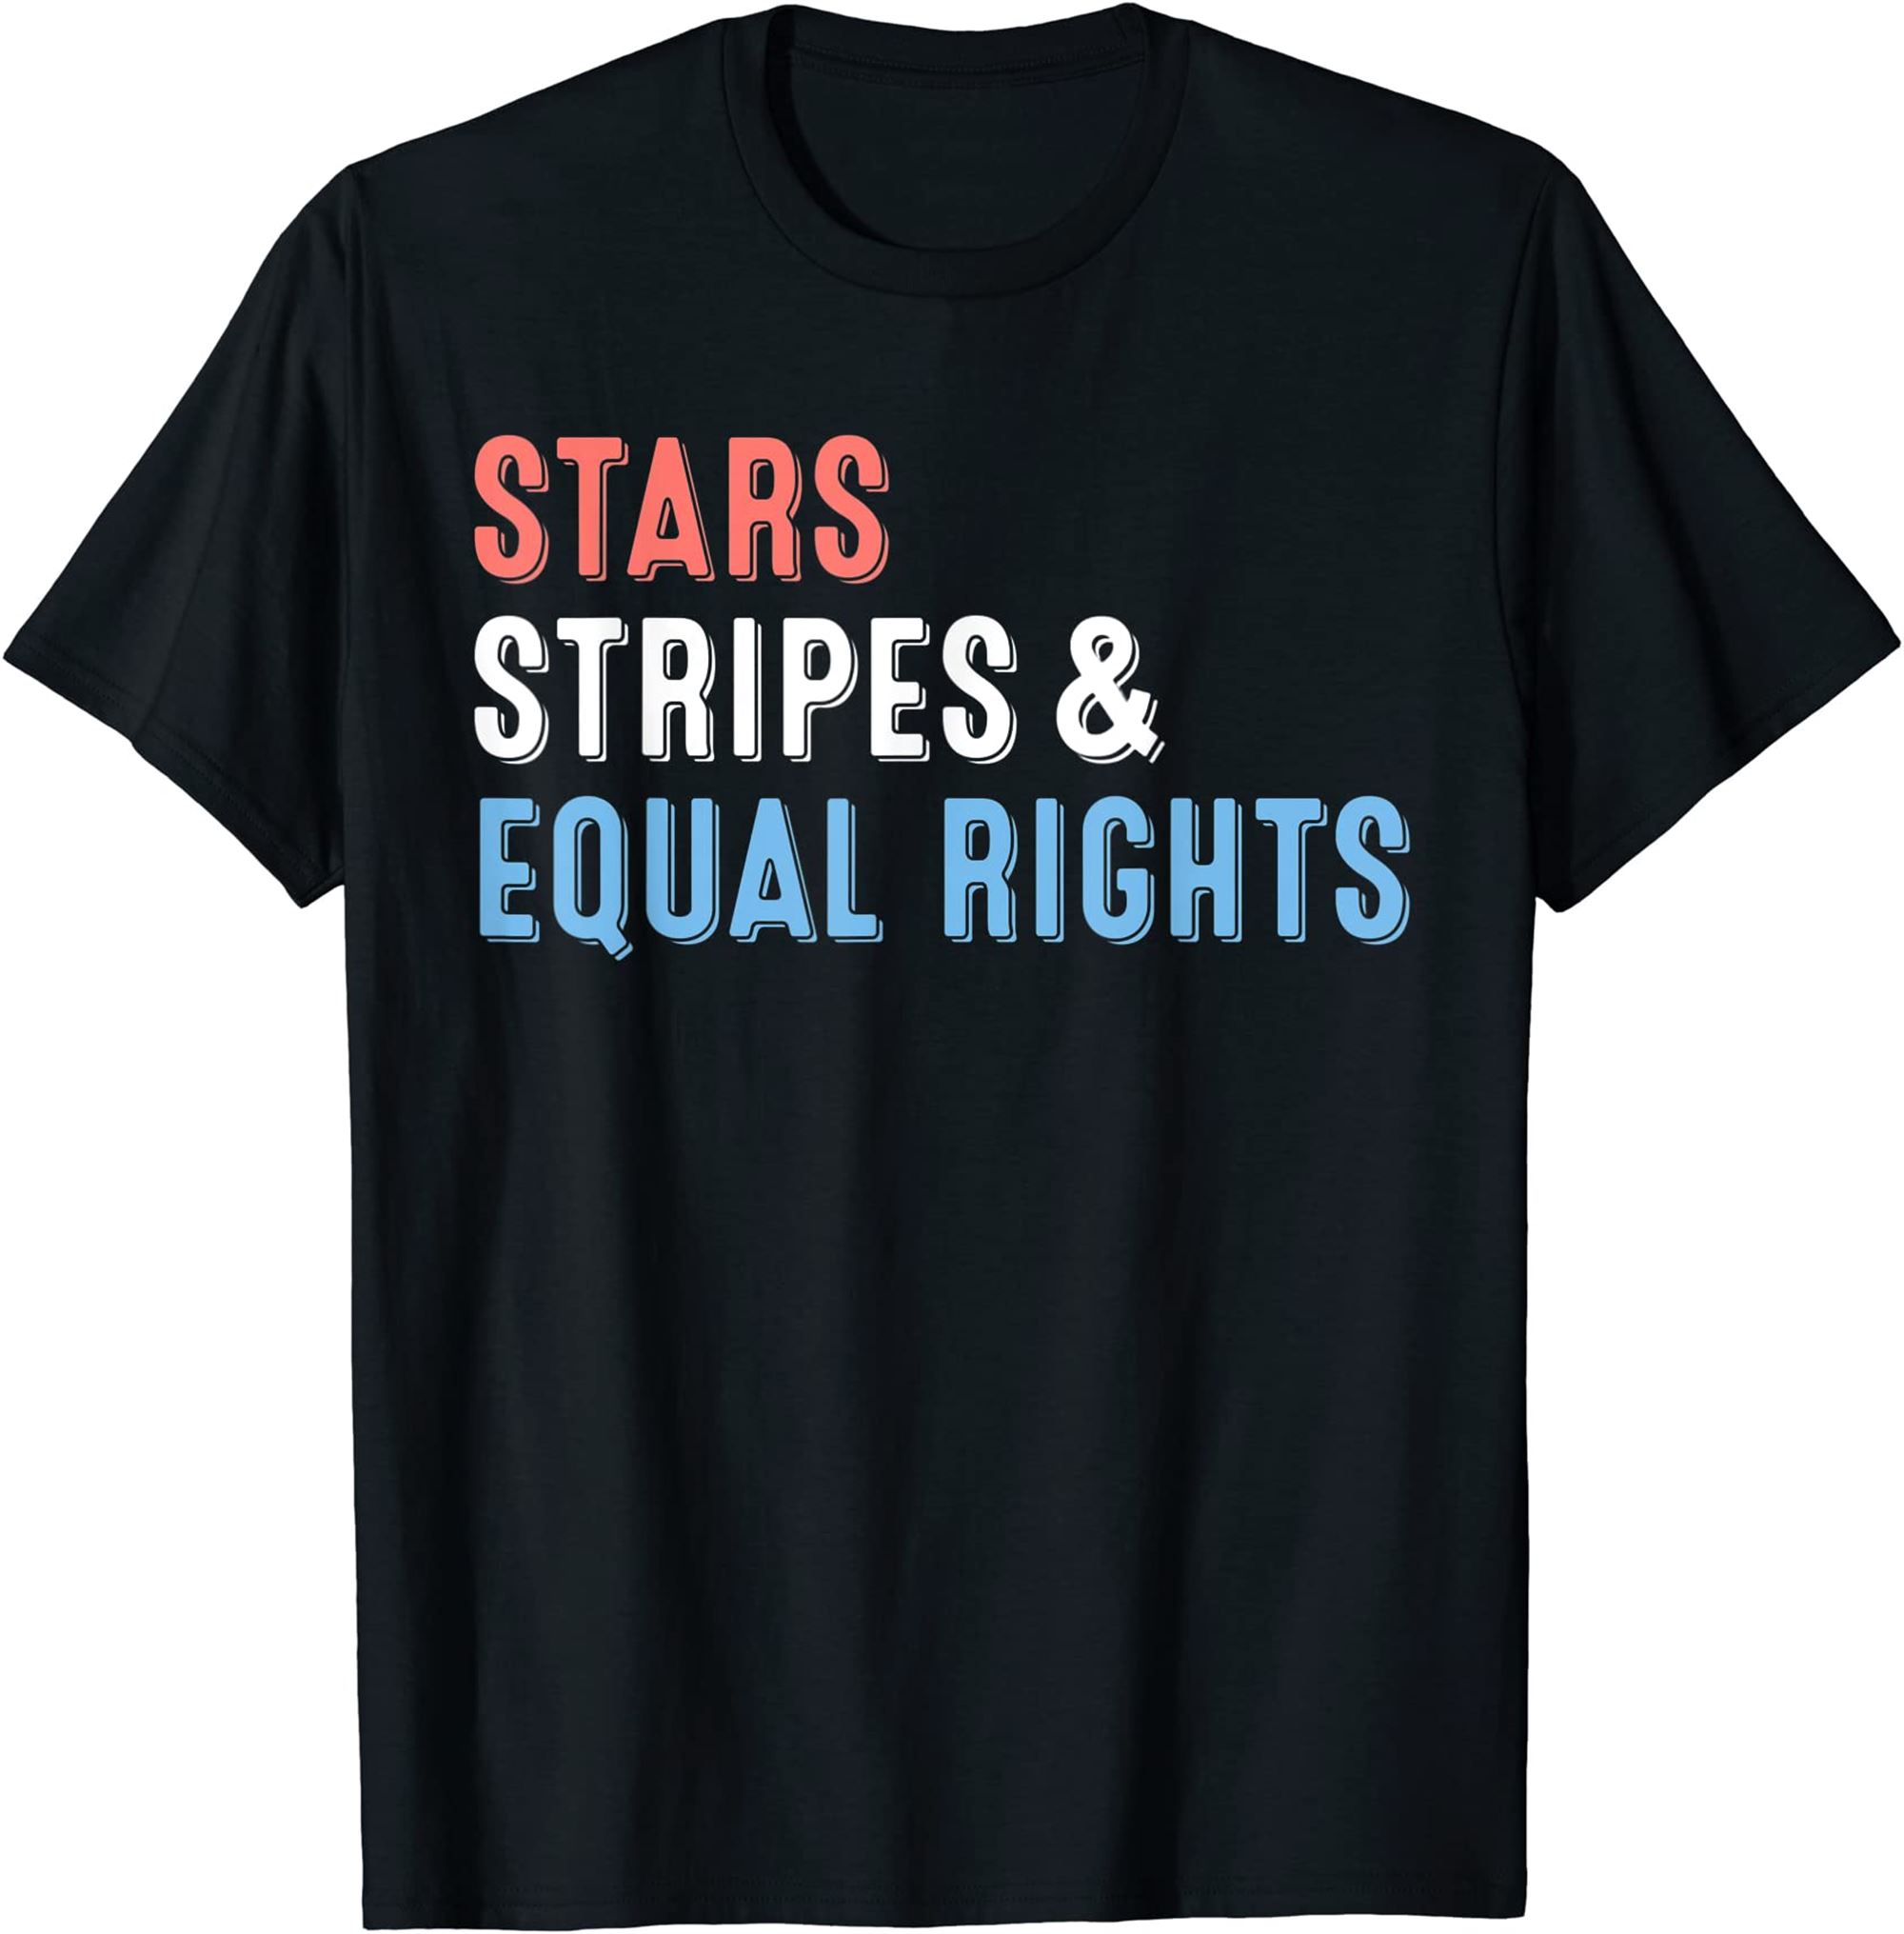 Stars Stripes And Equal Rights 4th Of July Womens Rights T-shirt Full Size Up To 5xl